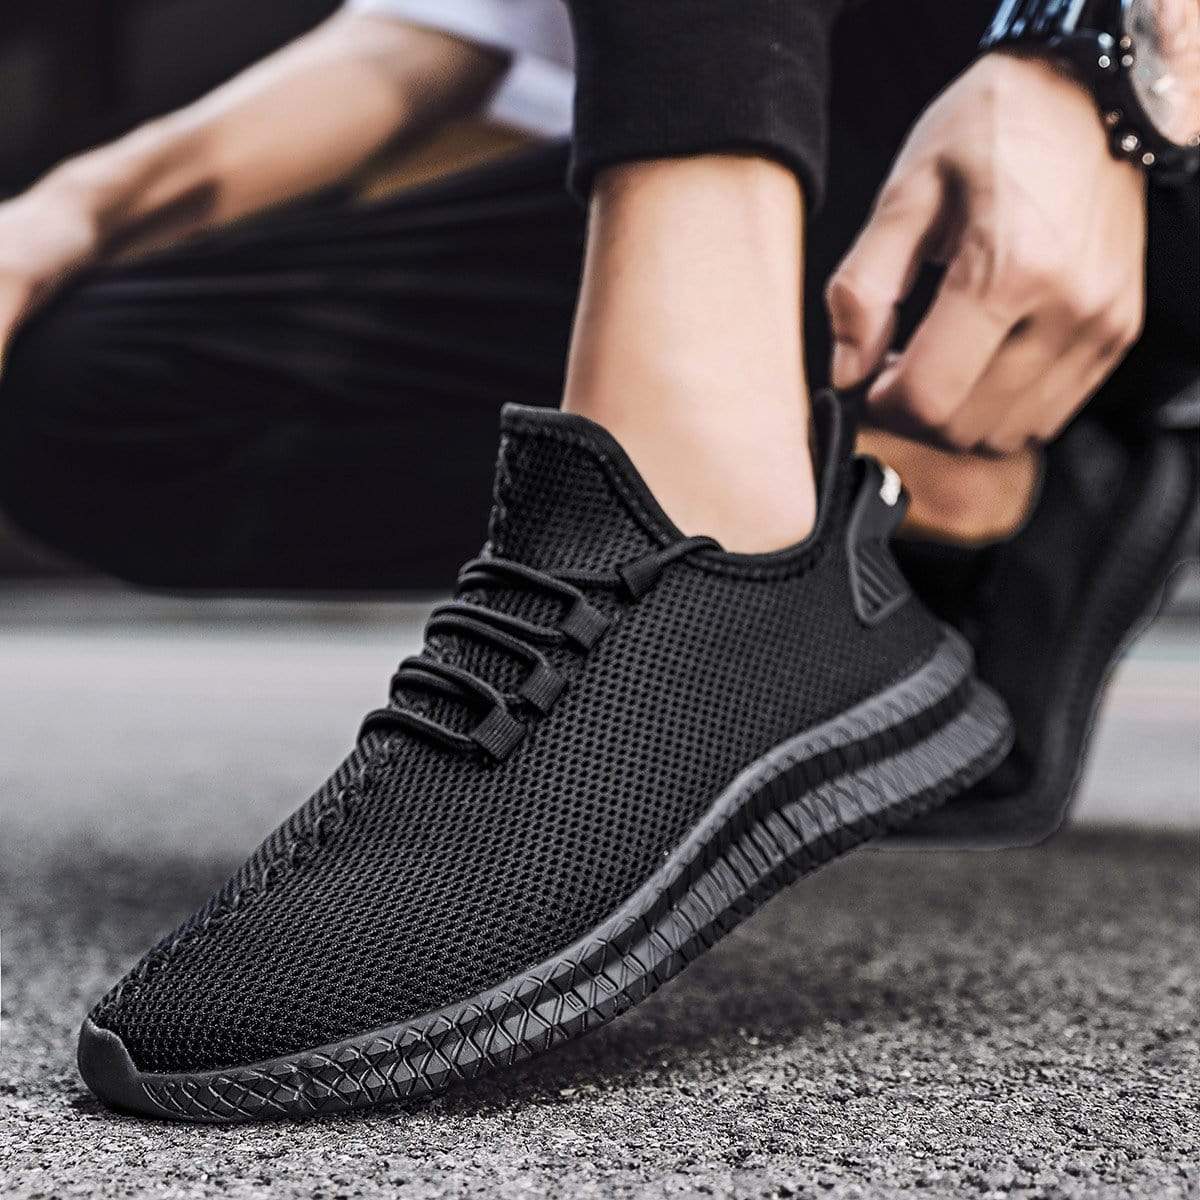 Damyuan New Casual Shoes Men's Mesh Breathable Non-slip Wear-resistant Outdoor Sports Shoes White Designer Heightened Sneakers